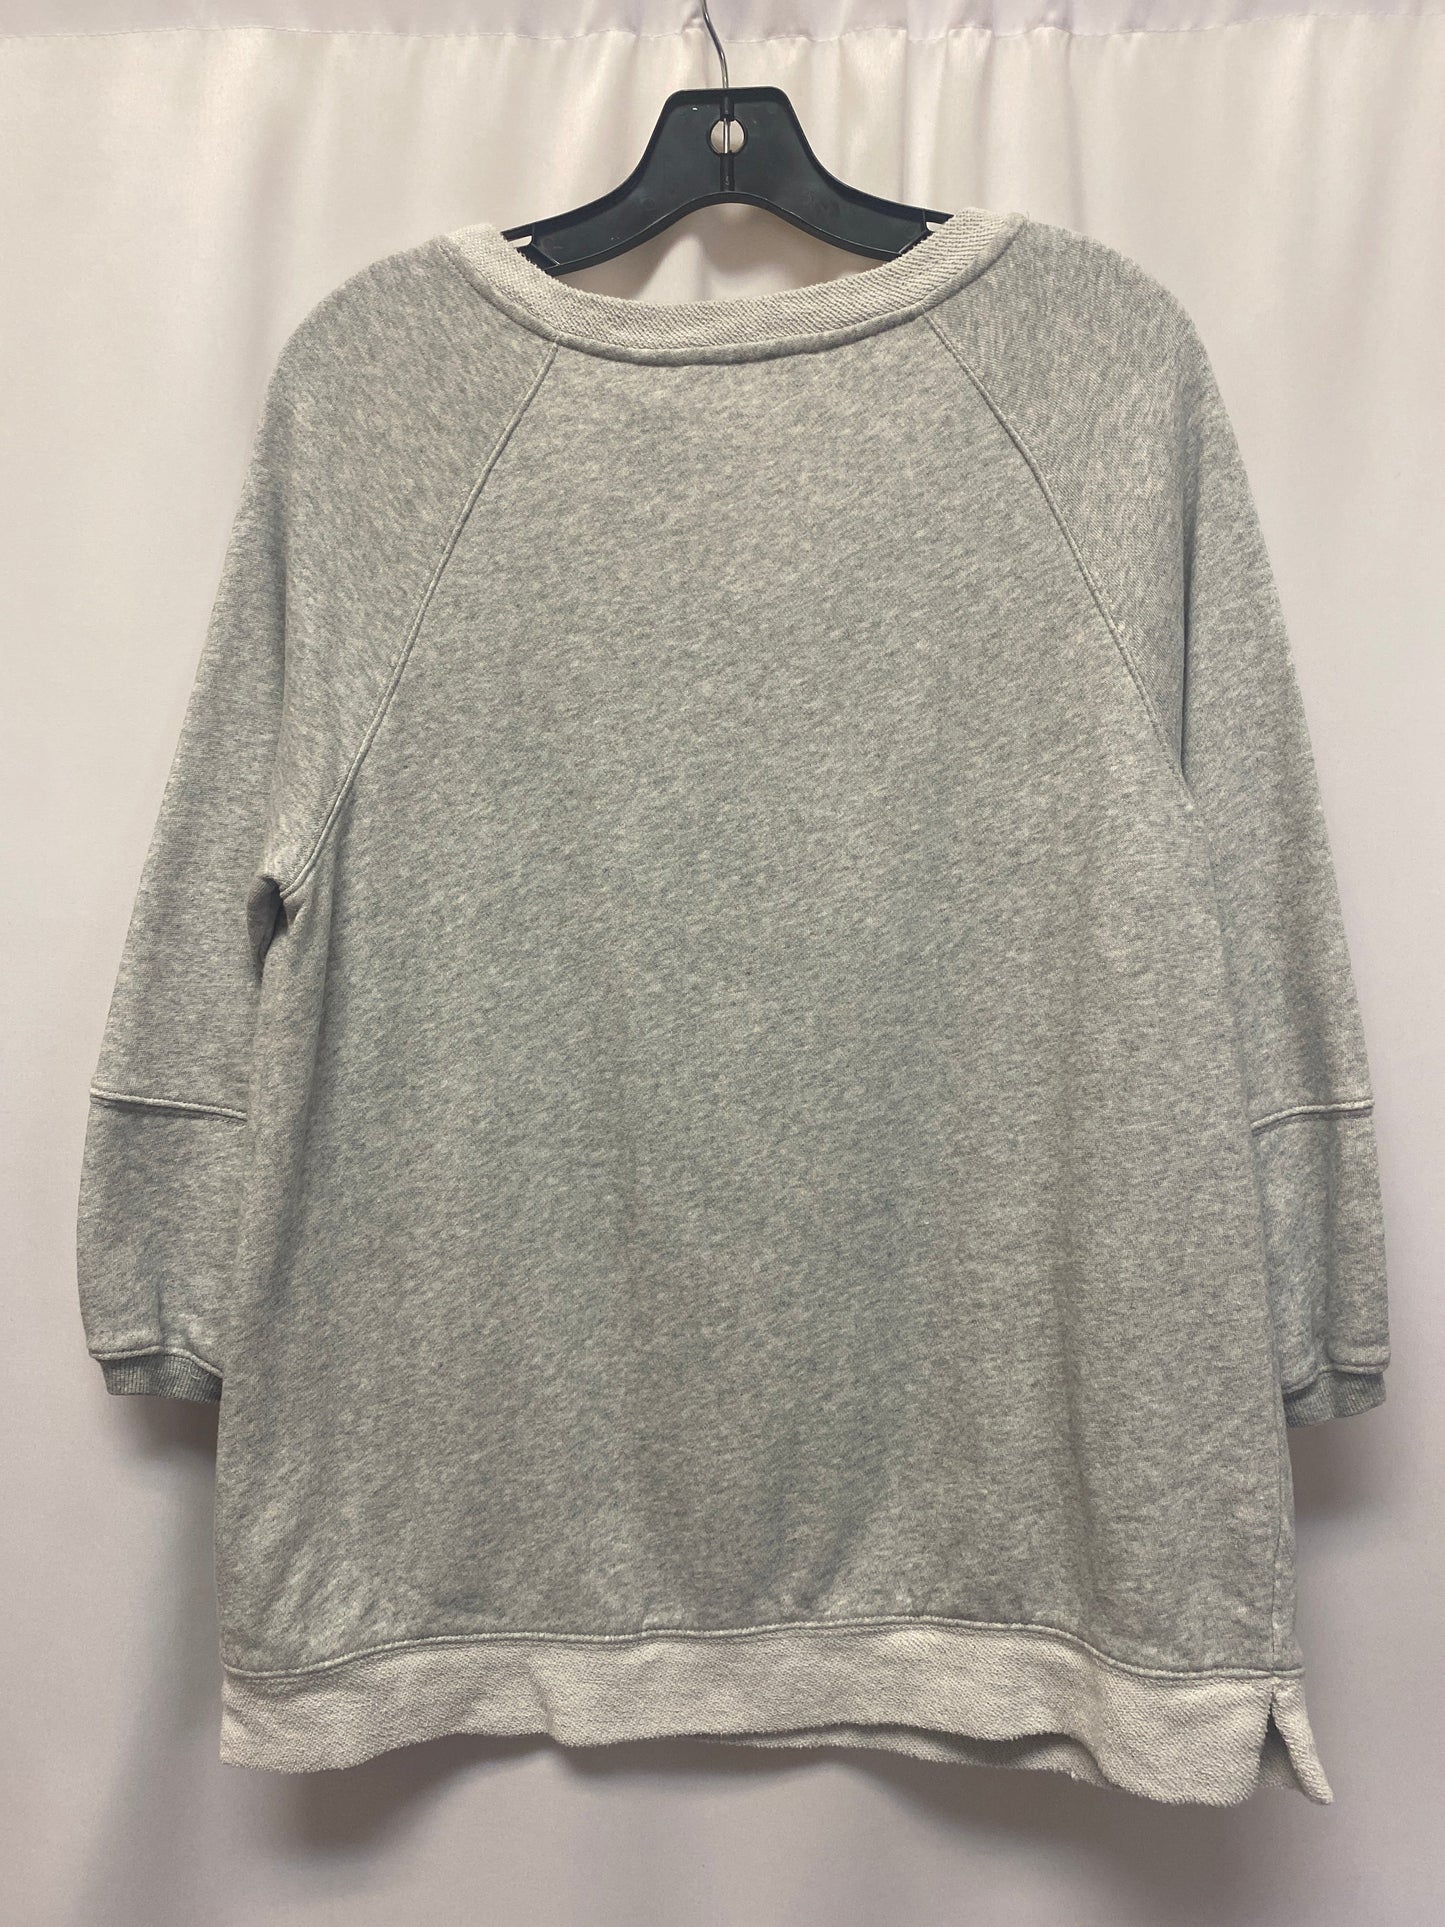 Grey Top Long Sleeve Soft Surroundings, Size S